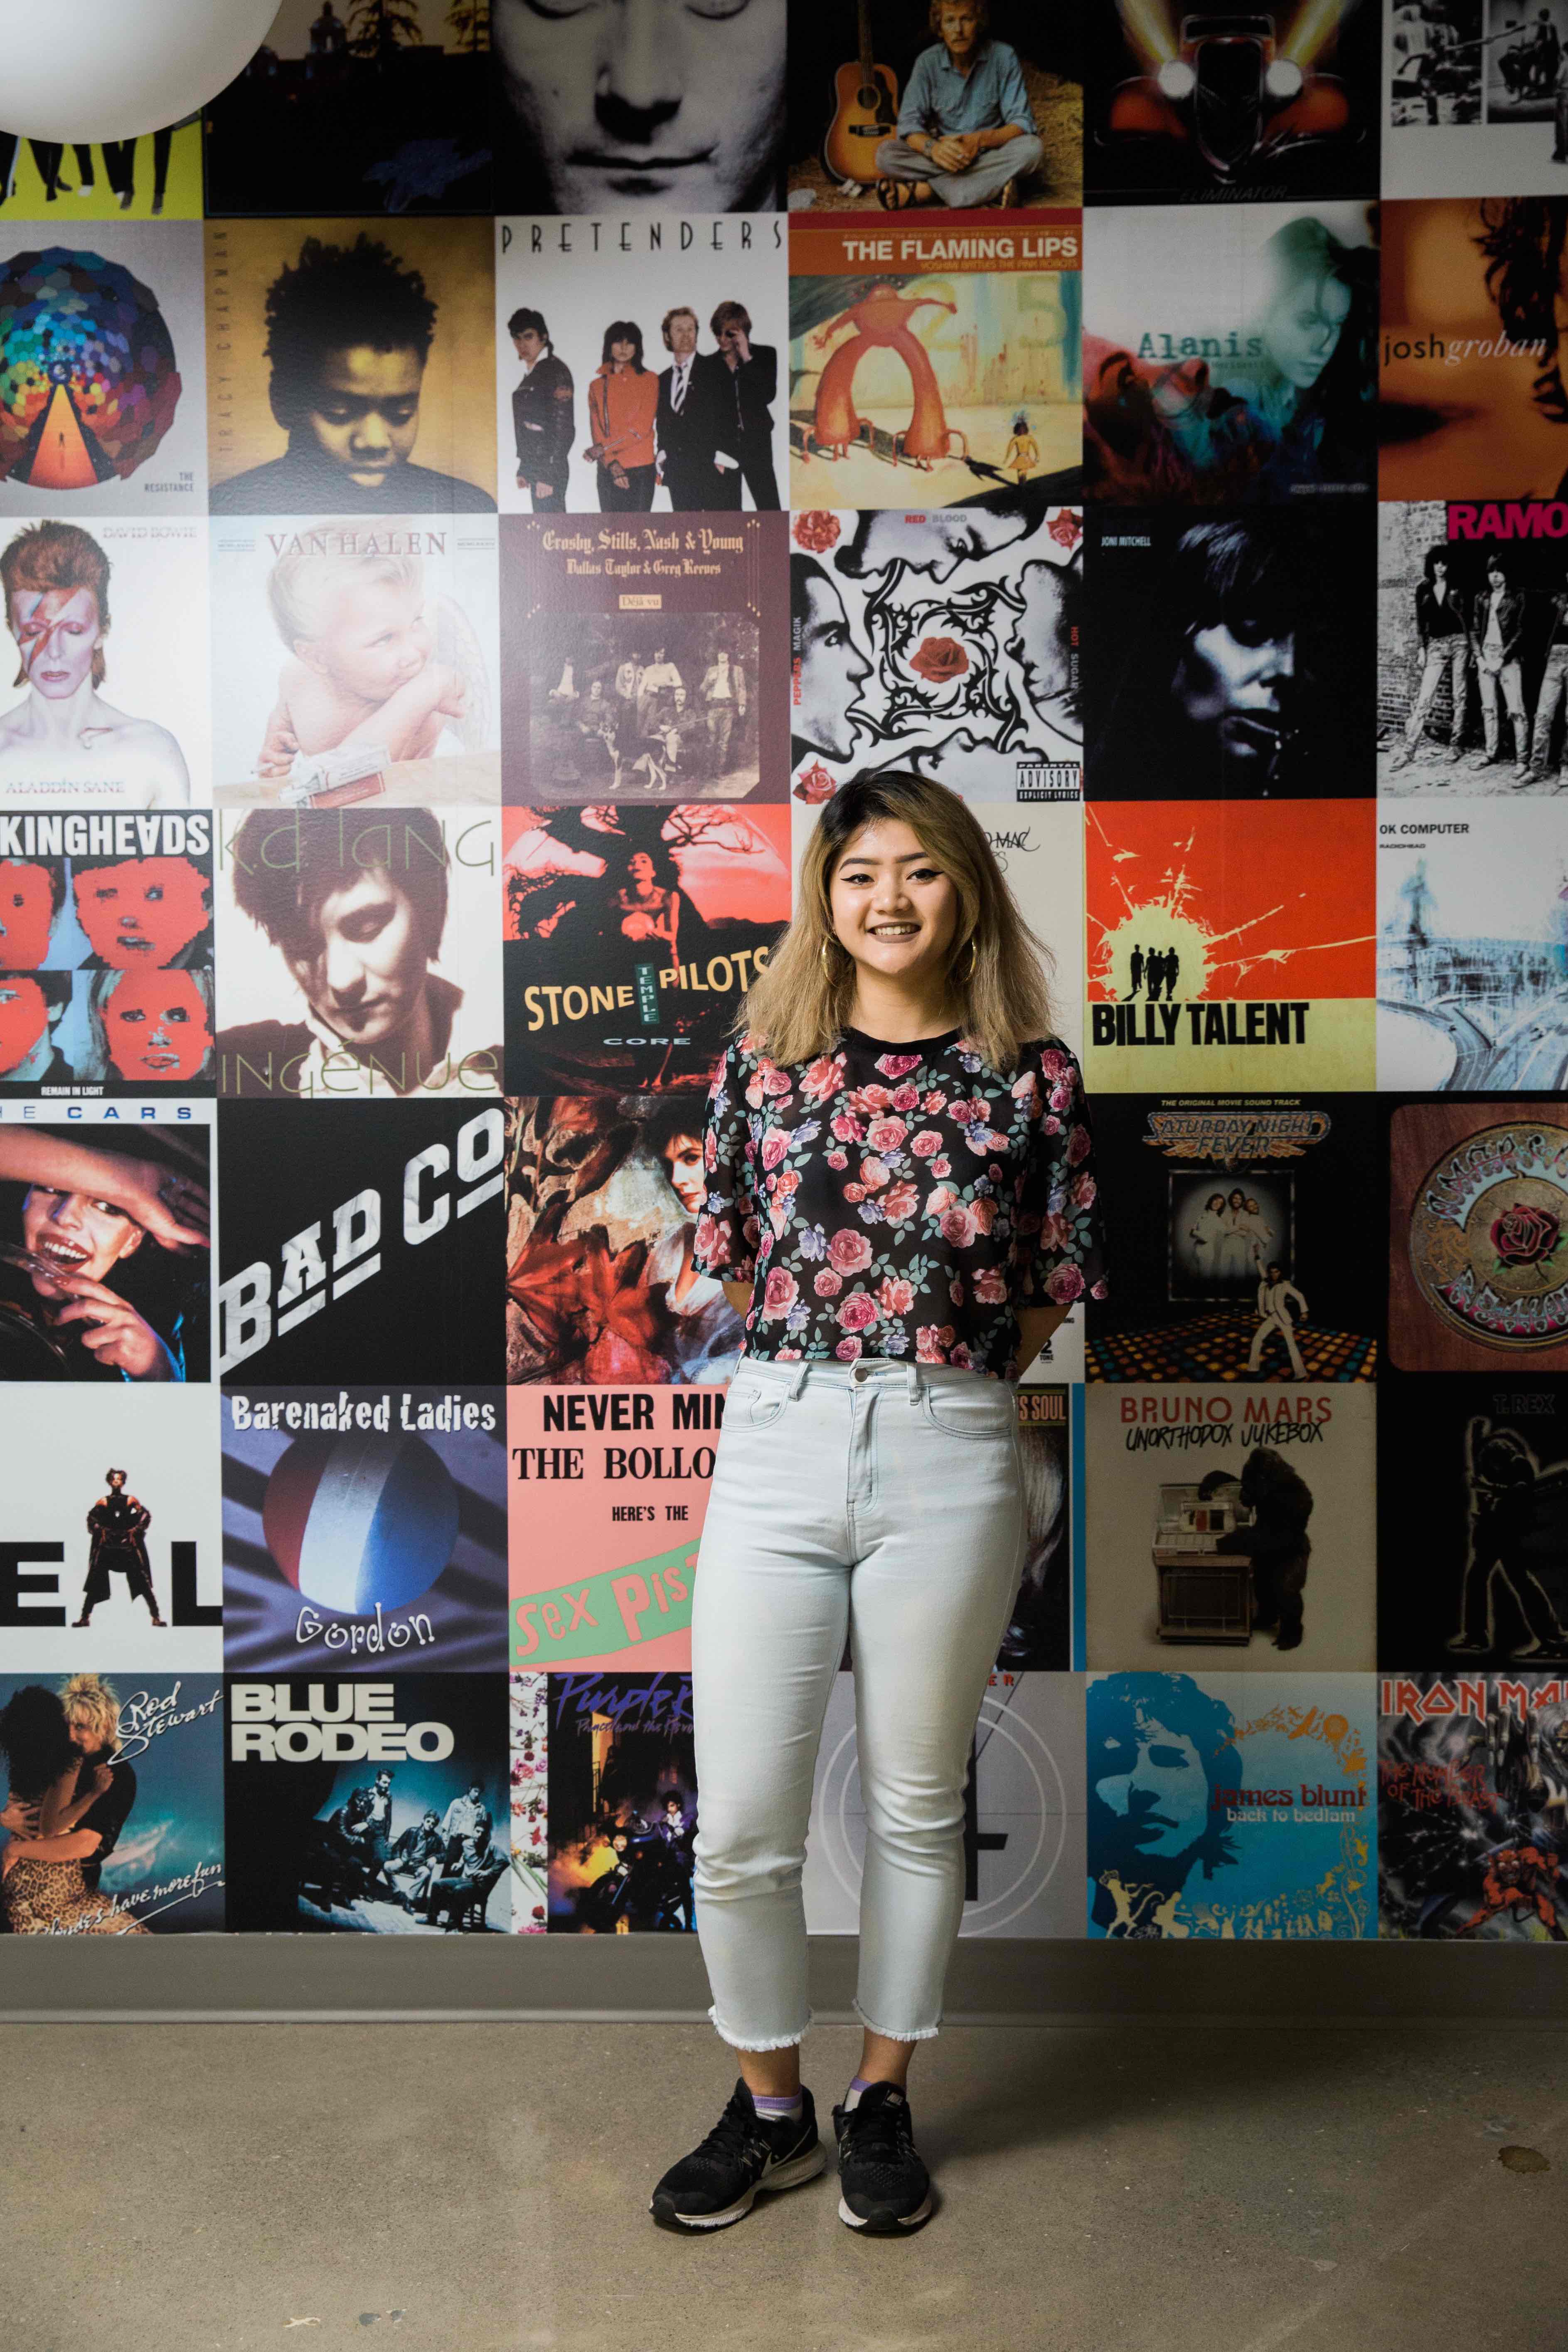 The image displayed shows a student standing in front of a wall of record covers.